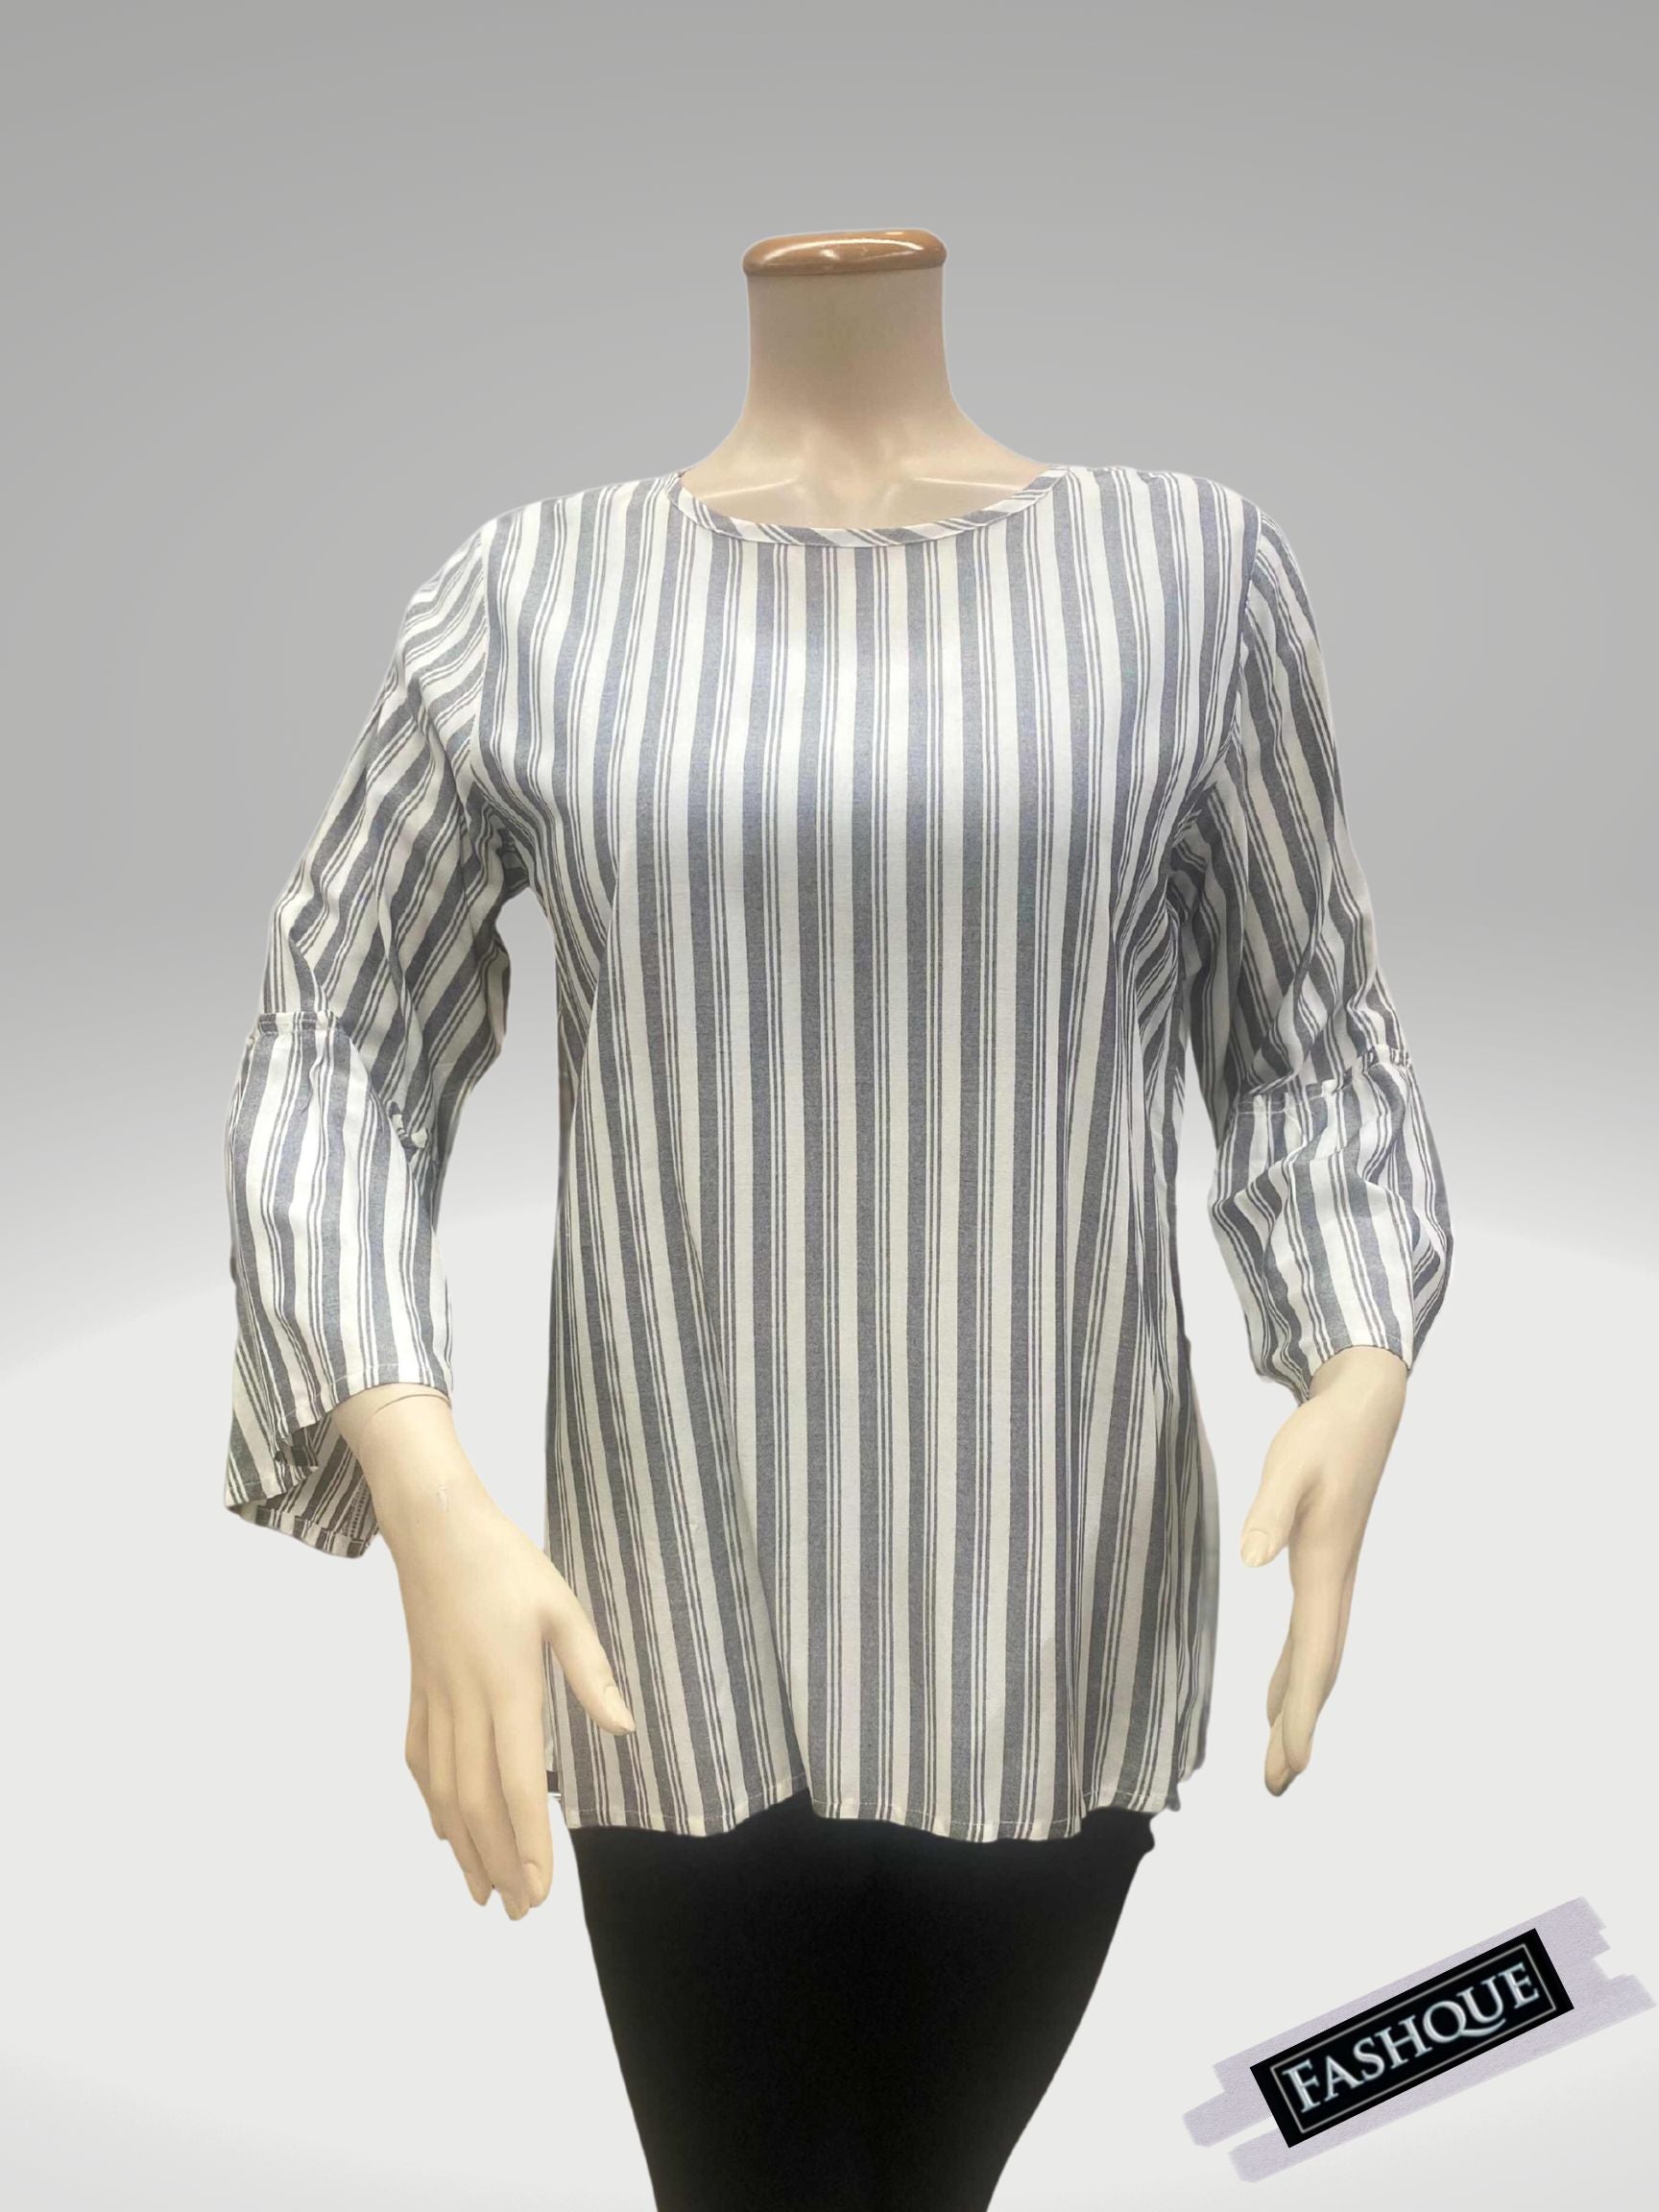 BOAT NECK 3/4 Bell SLEEVE CHECKS TOP - T706